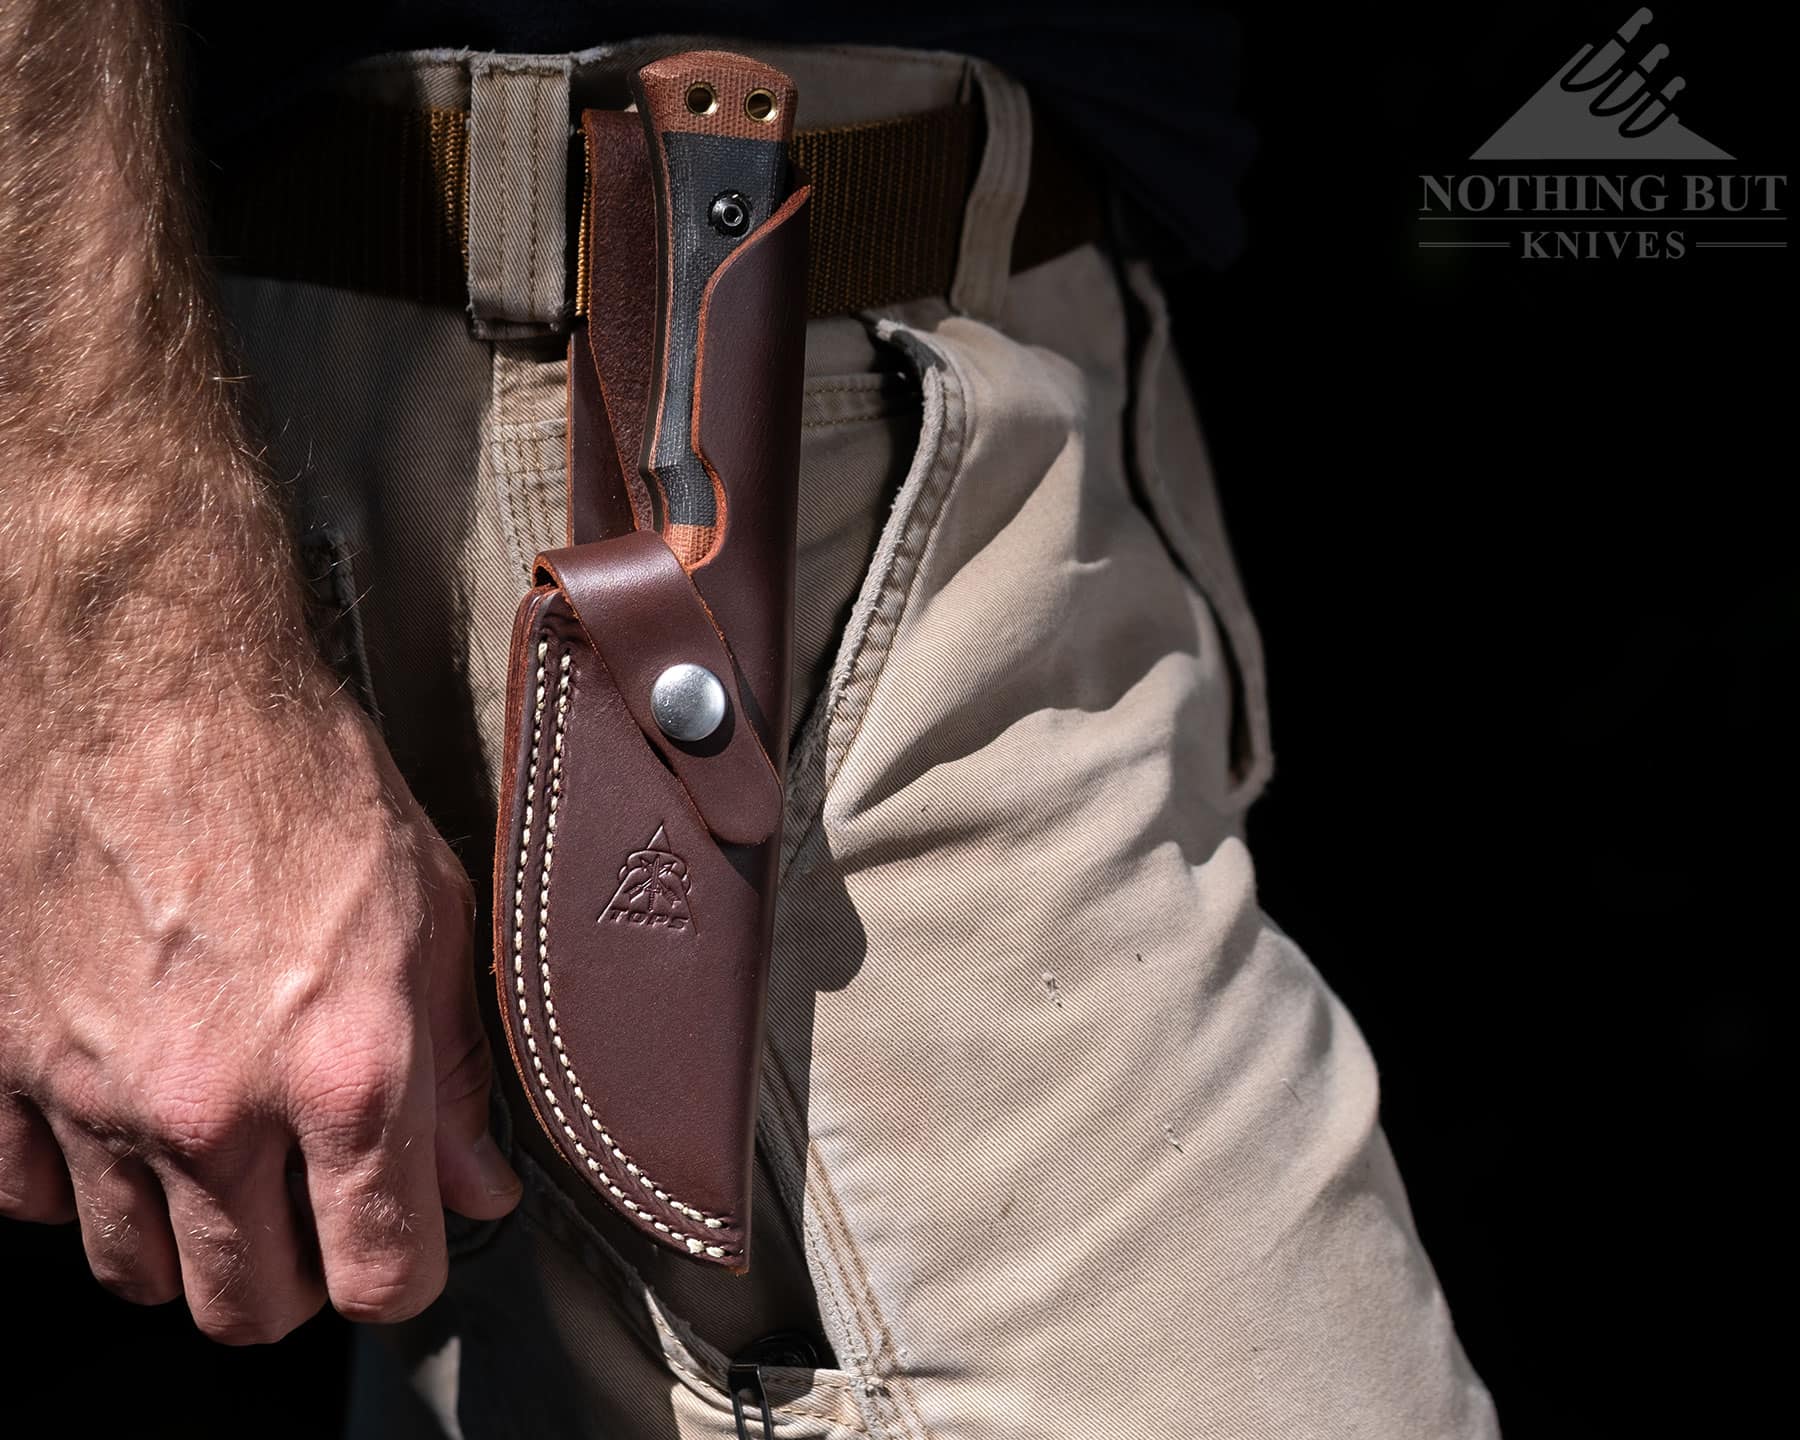 The leather Woodcraft sheath holds the knife in place well, but the retention strap is a bit unwieldy. 